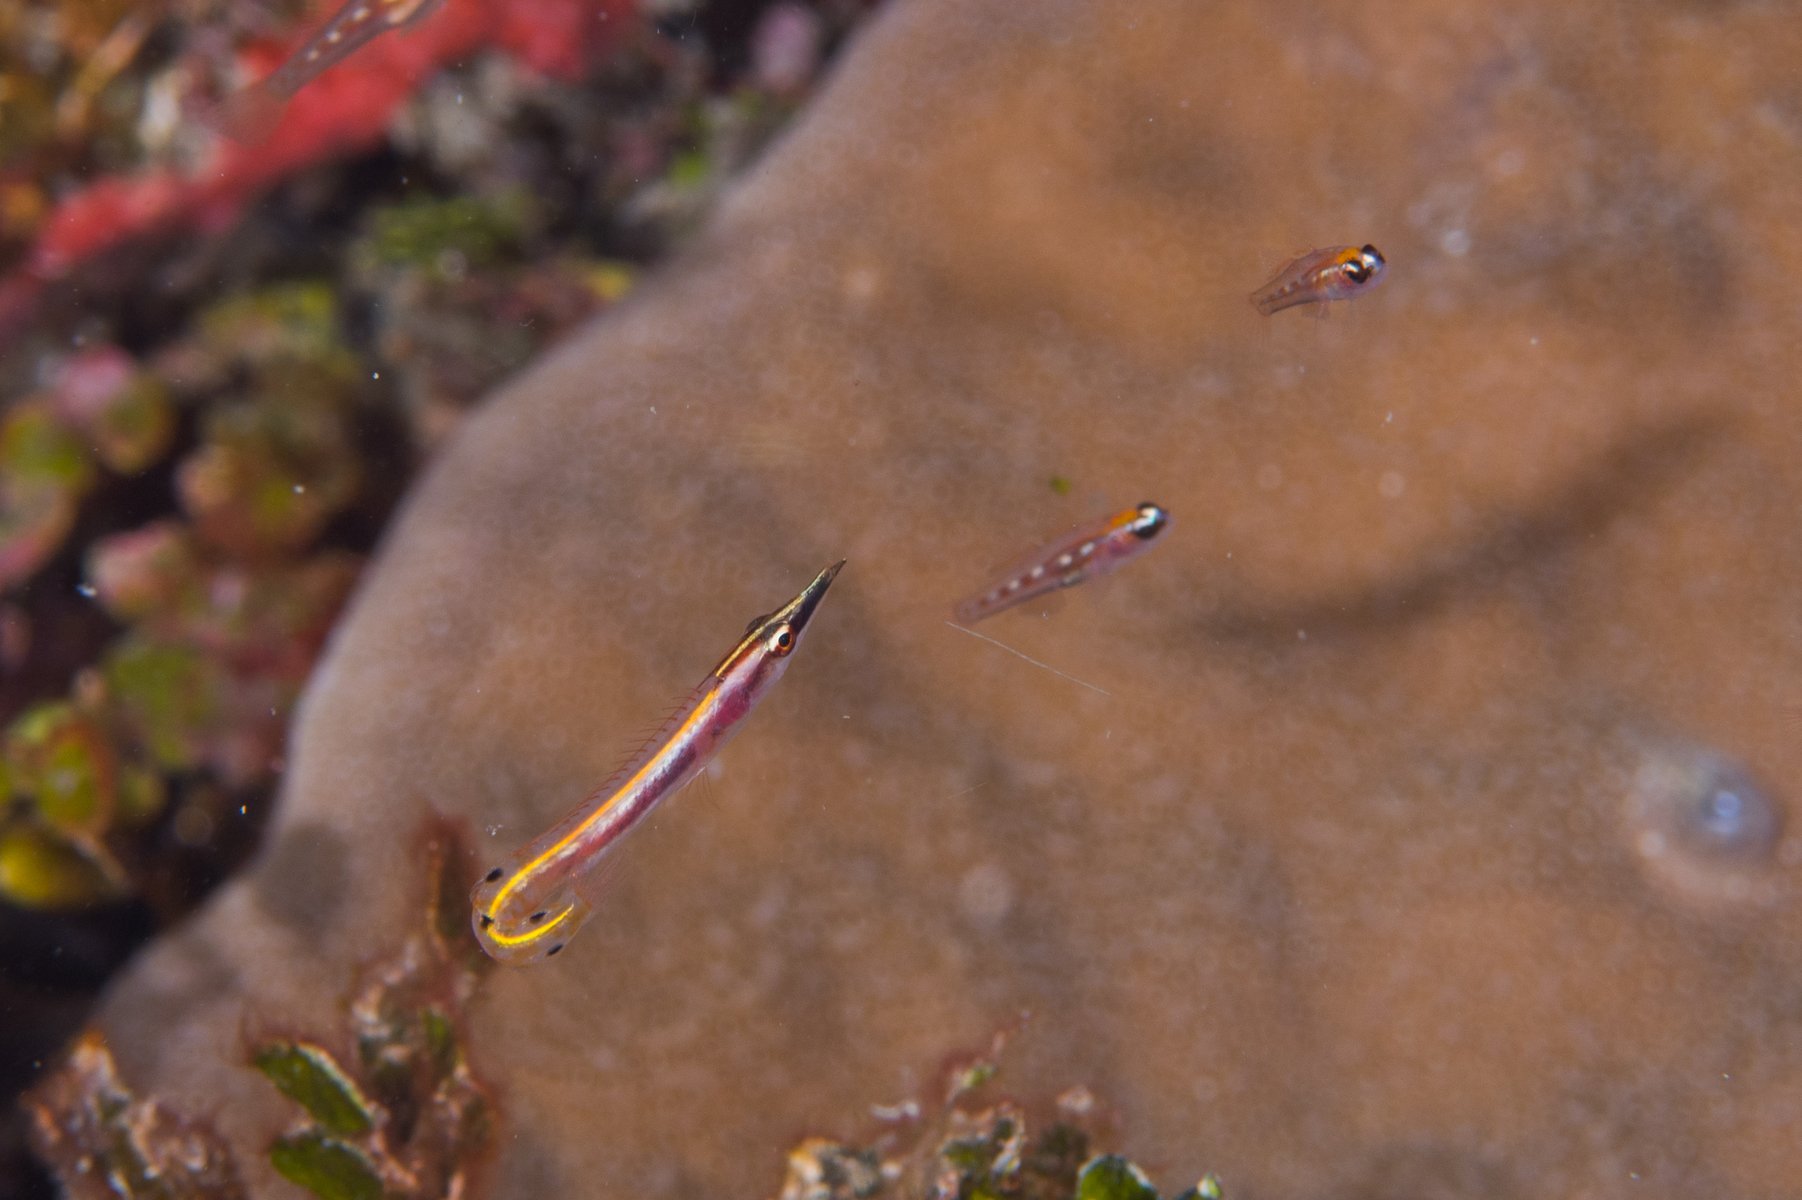 10/8/2021An Arrow Blenny, with characteristic bent tail.